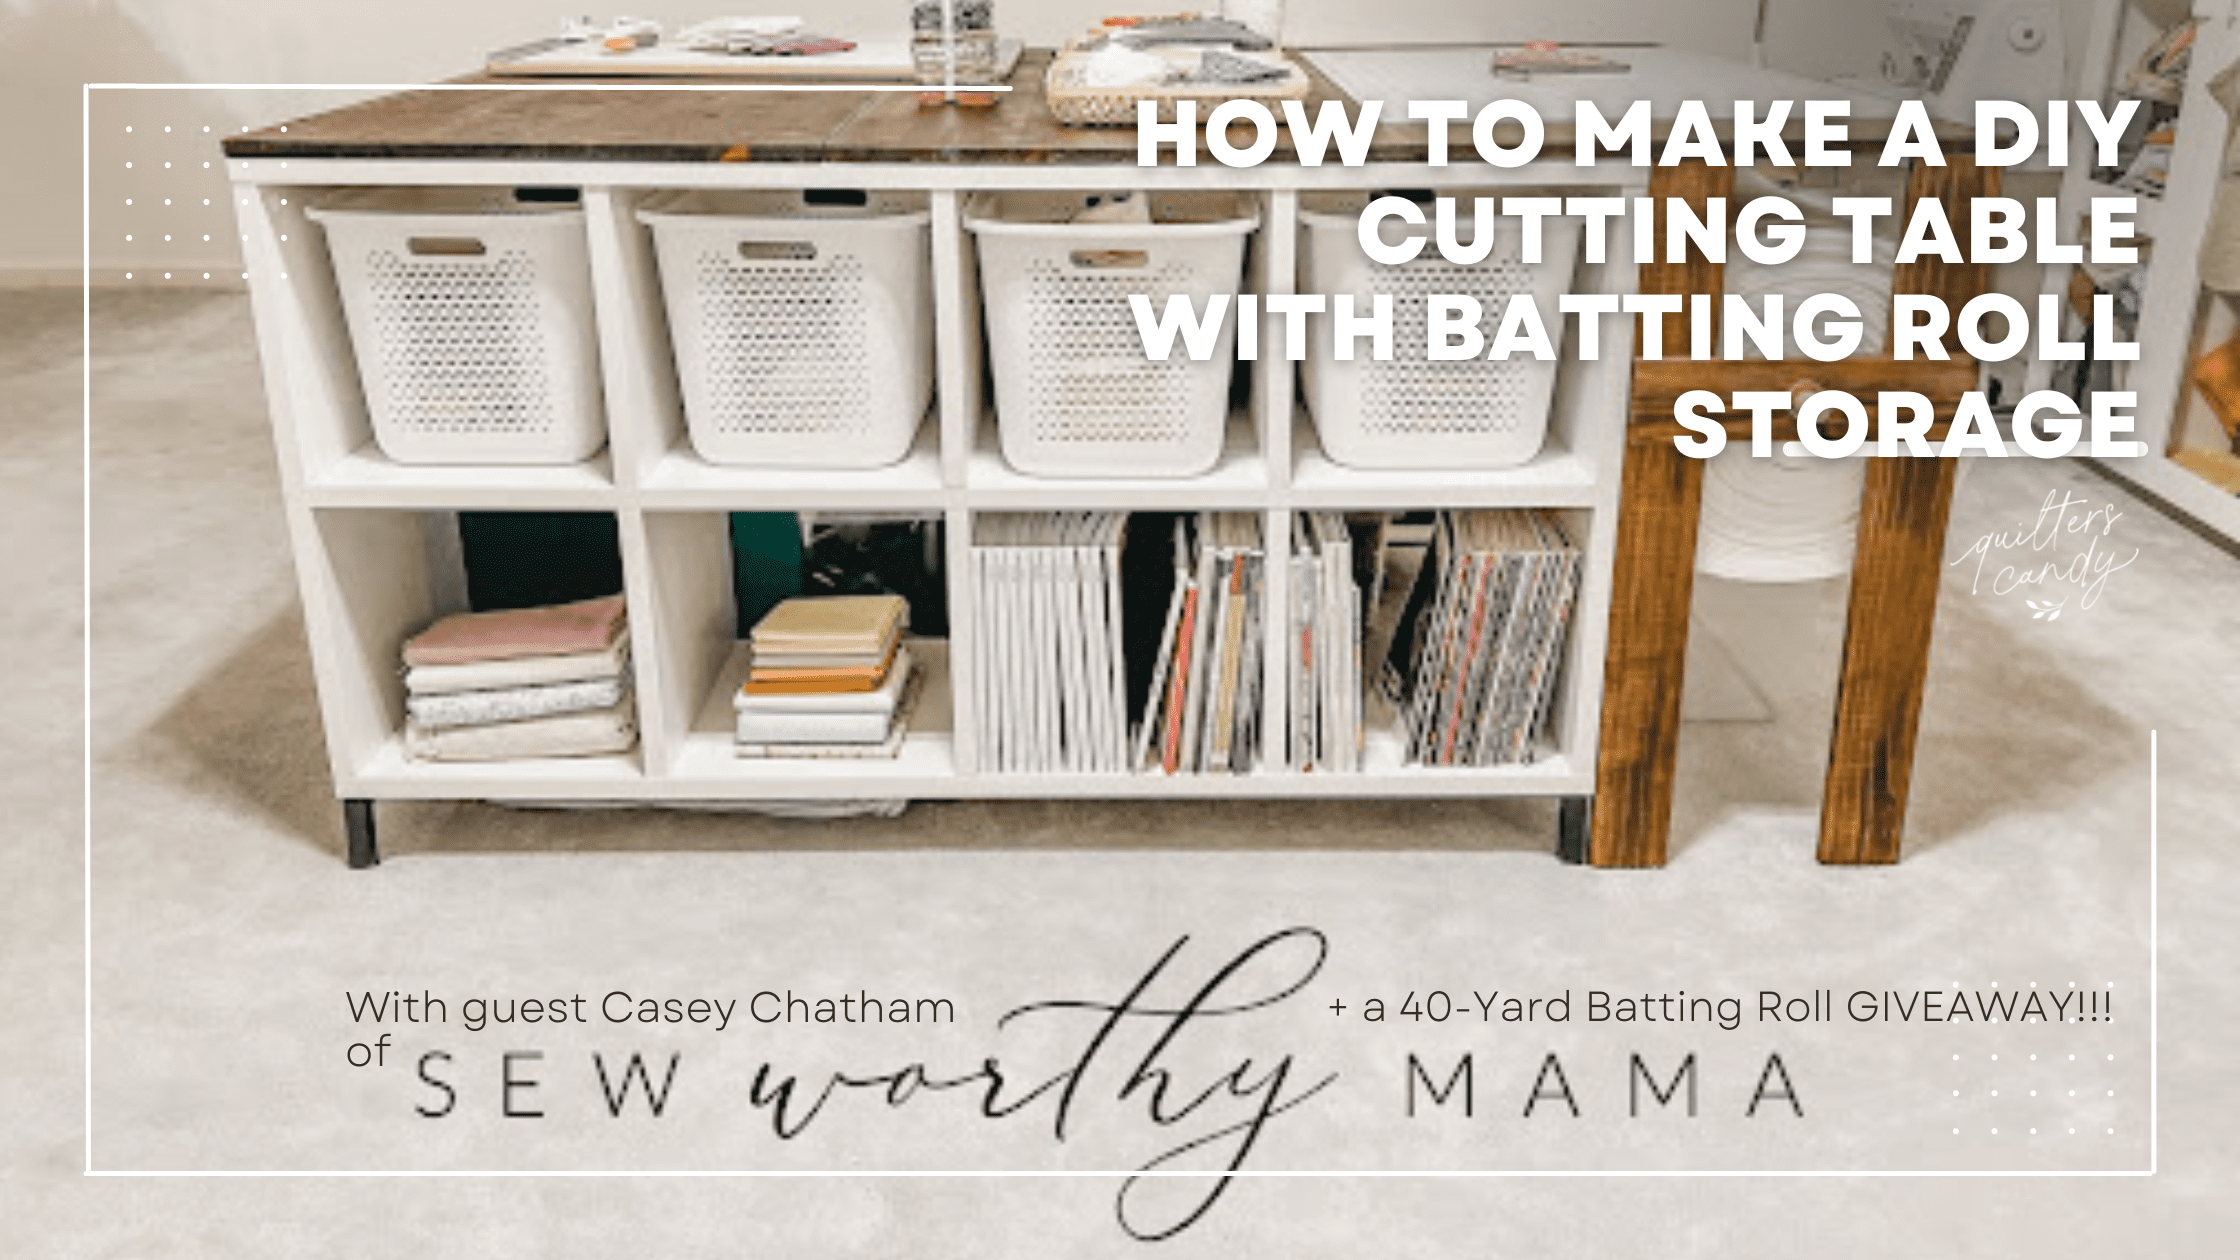 How to Make a DIY Cutting Table with Batting Roll Storage - Quilters Candy